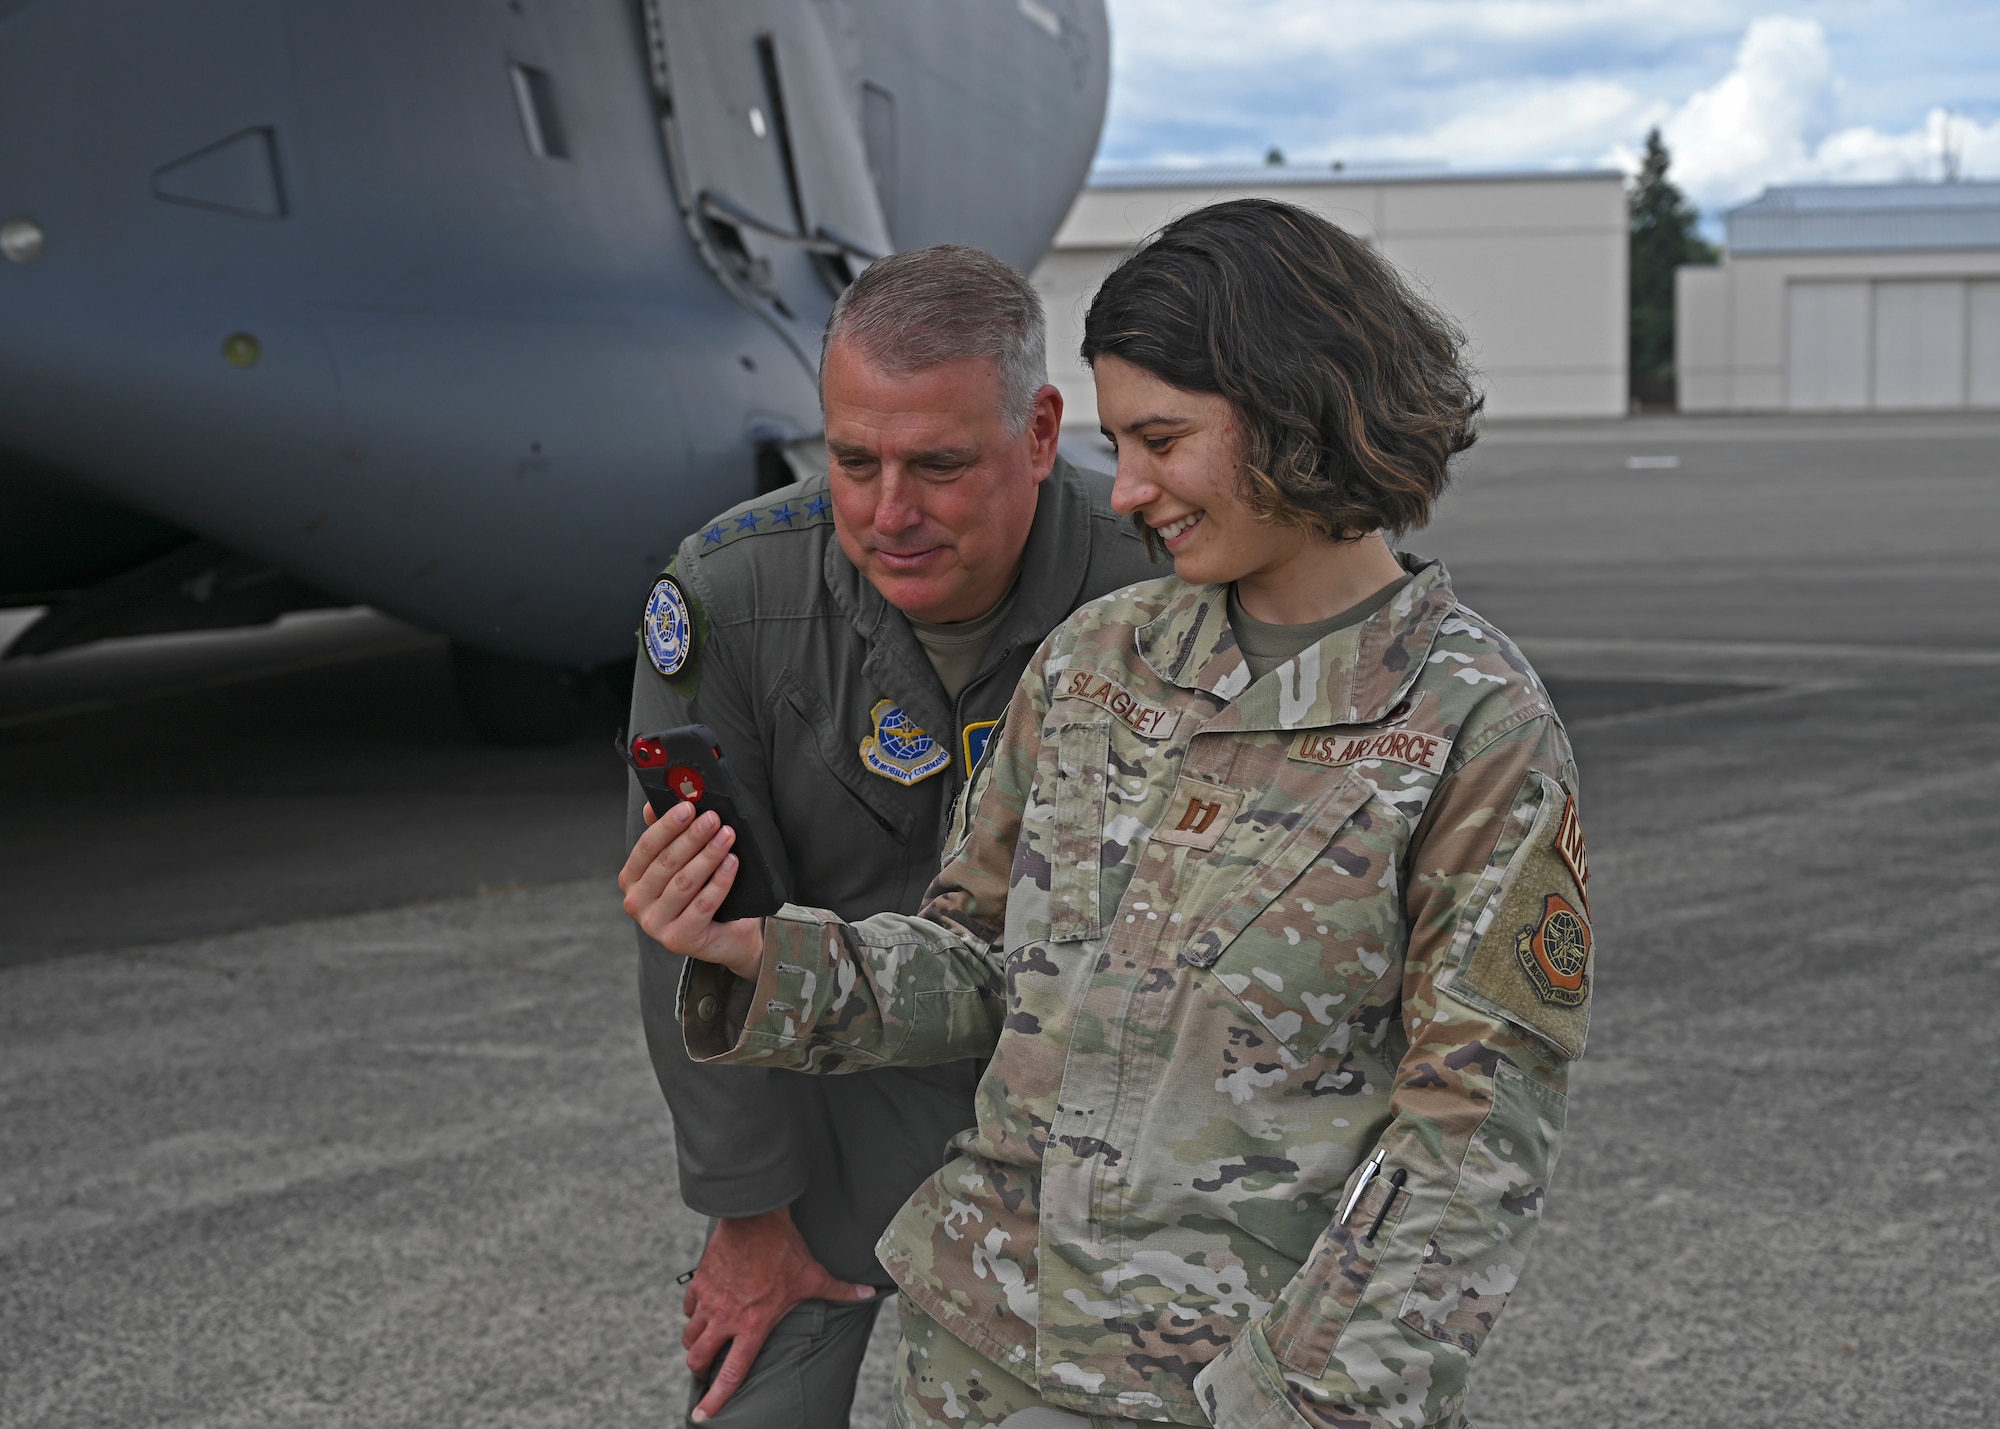 U.S. Air Force Gen. Mike Minihan, left, Air Mobility Command commander, and Capt. Madeline Slagley, 62nd Maintenance Squadron officer in charge, FaceTime Slagley’s family at Joint Base Lewis-McChord, Washington, July 7, 2022. Minihan coined Slagley as a star performer during his visit to JBLM. (U.S. Air Force photo by Senior Airman Callie Norton)